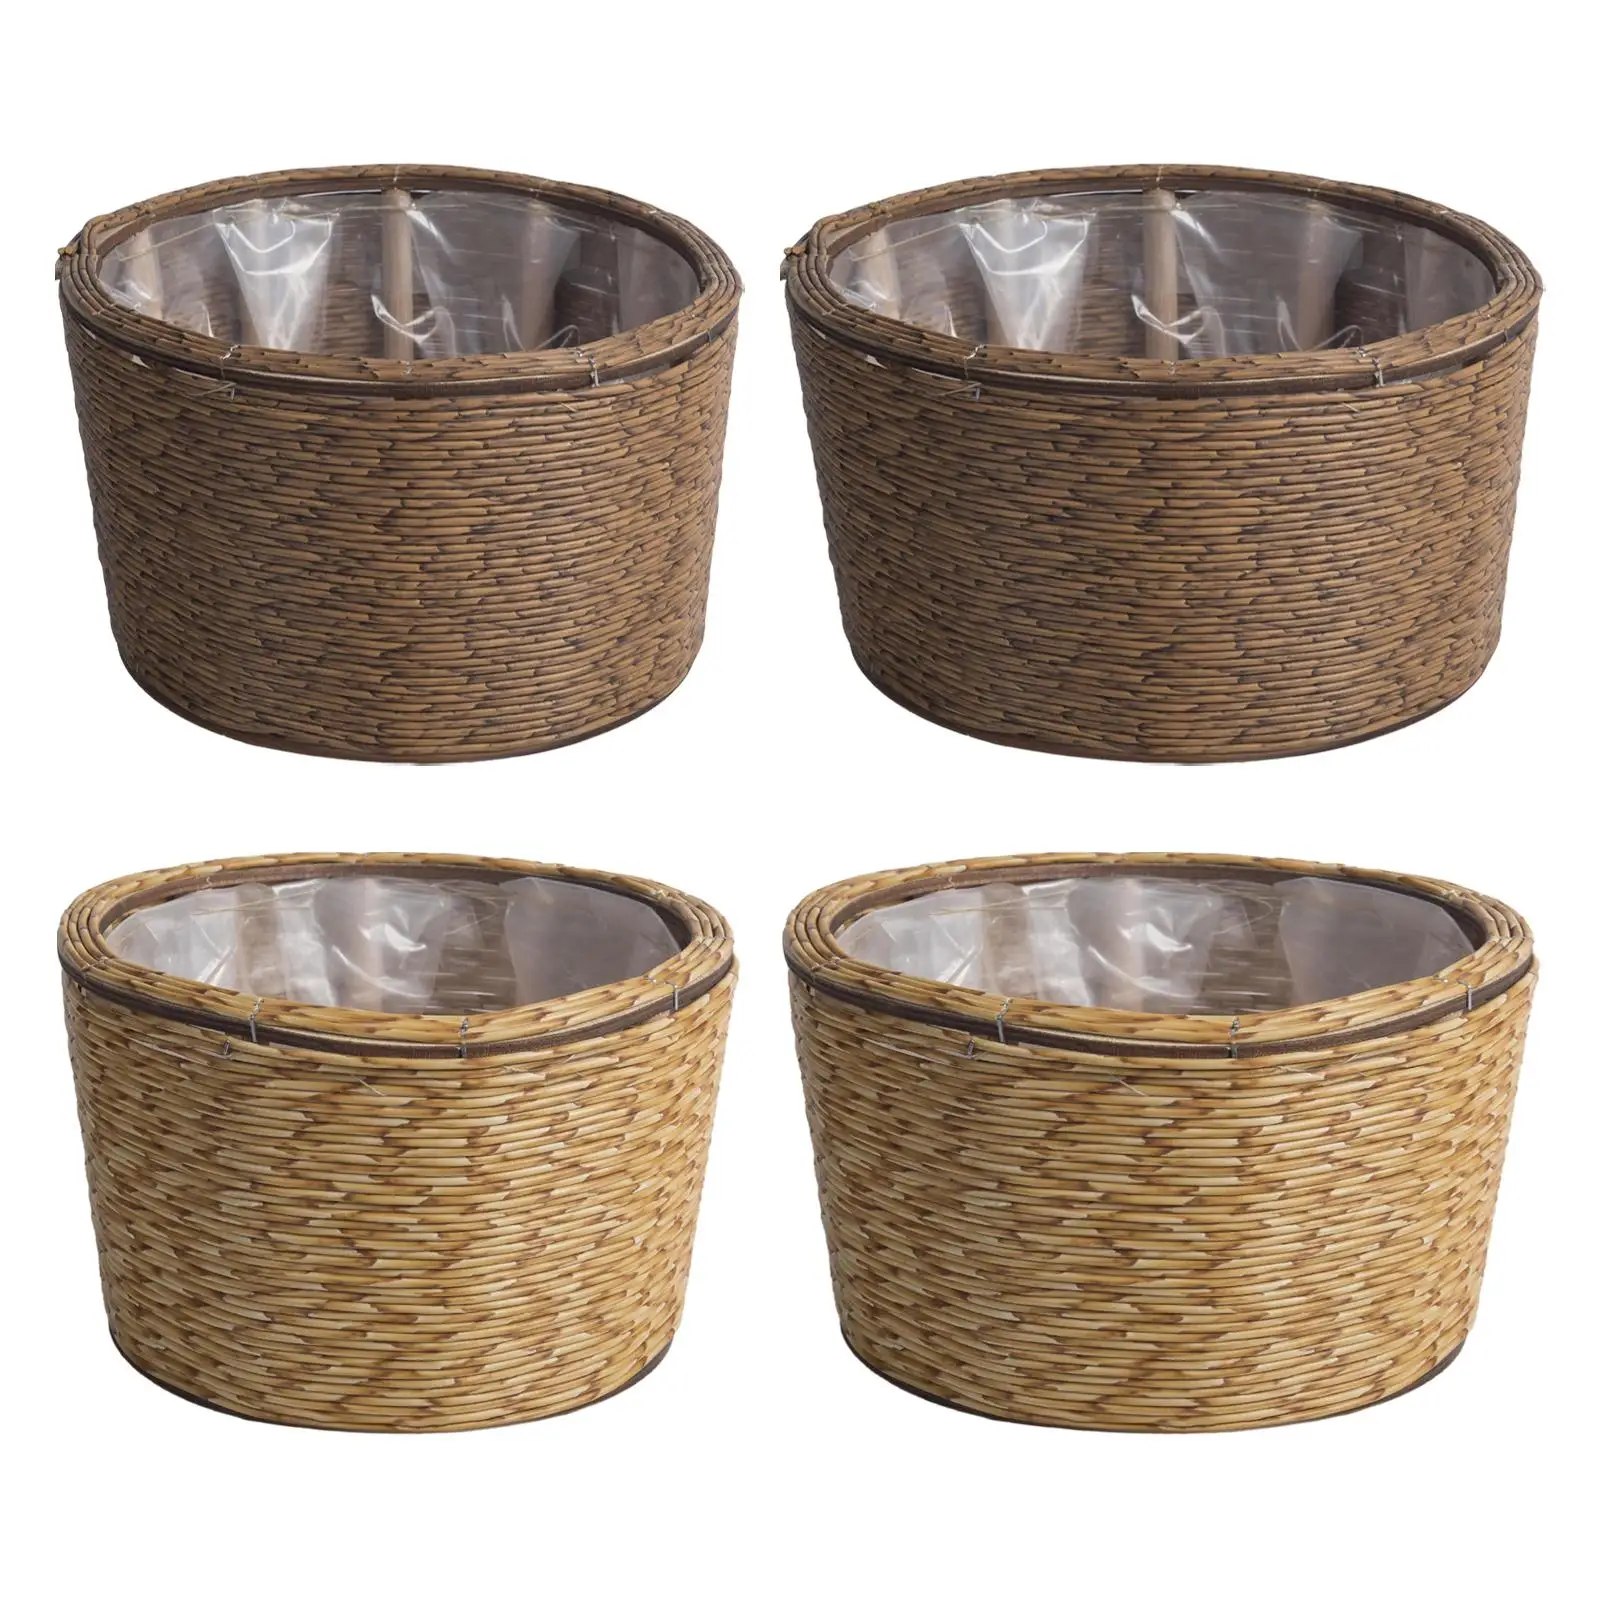 Woven Planters Basket with Plastic Liner Laundry Bag Containers Flowerpot Plant Pot for Indoor Picnic Balcony Bedroom Decoration